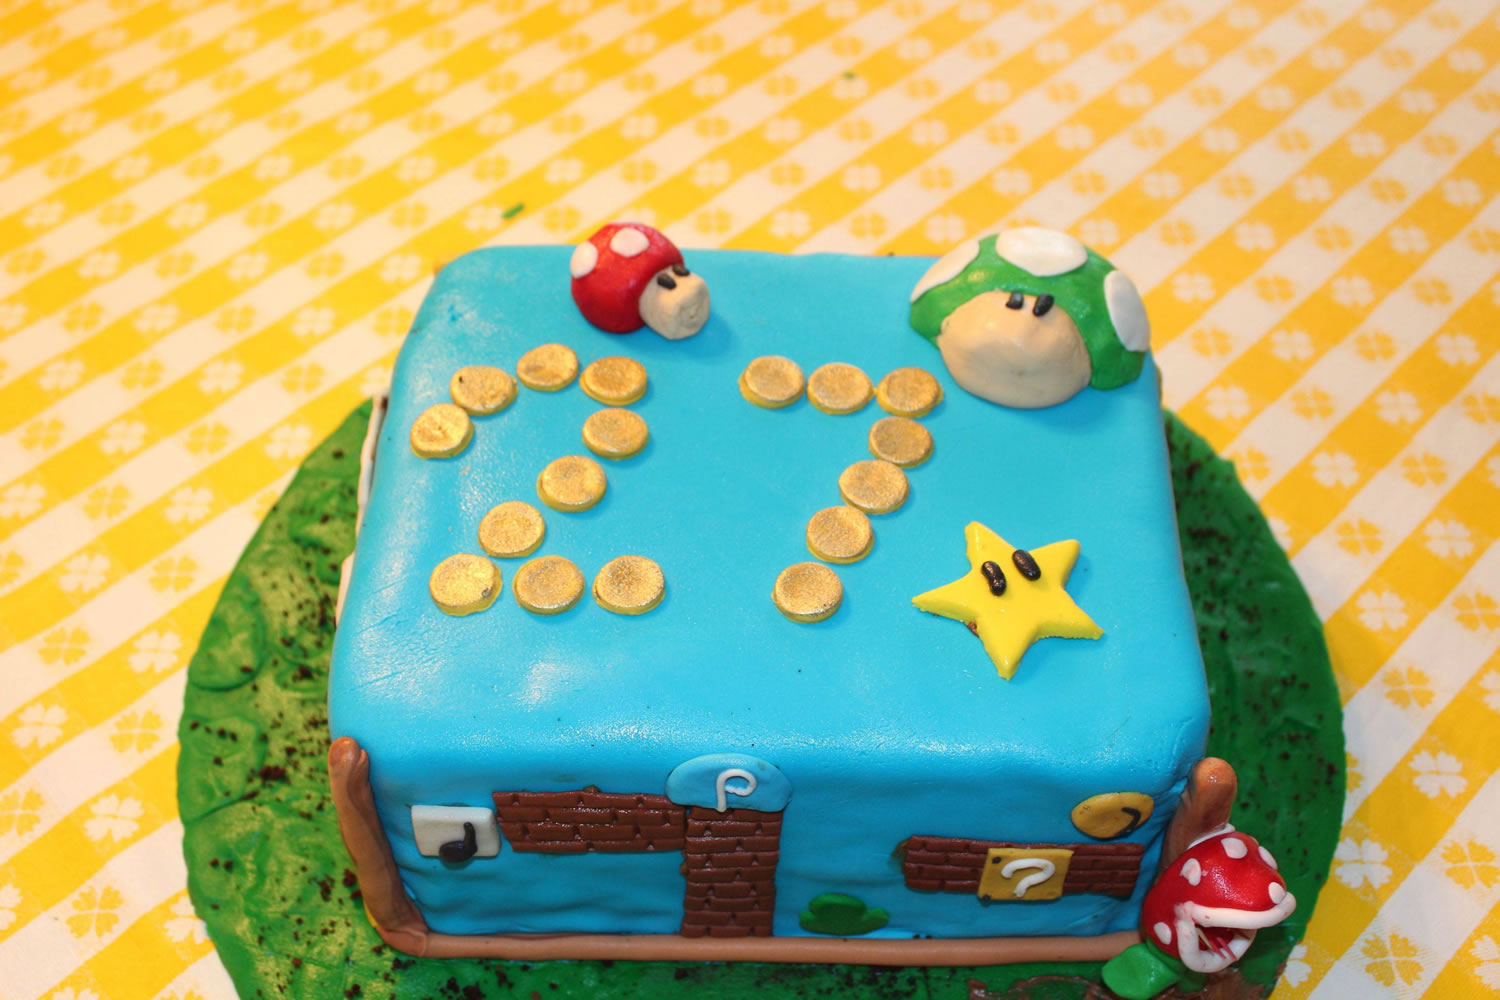 Justin Clark of Dallas made this Mario Brothers-themed square cake.